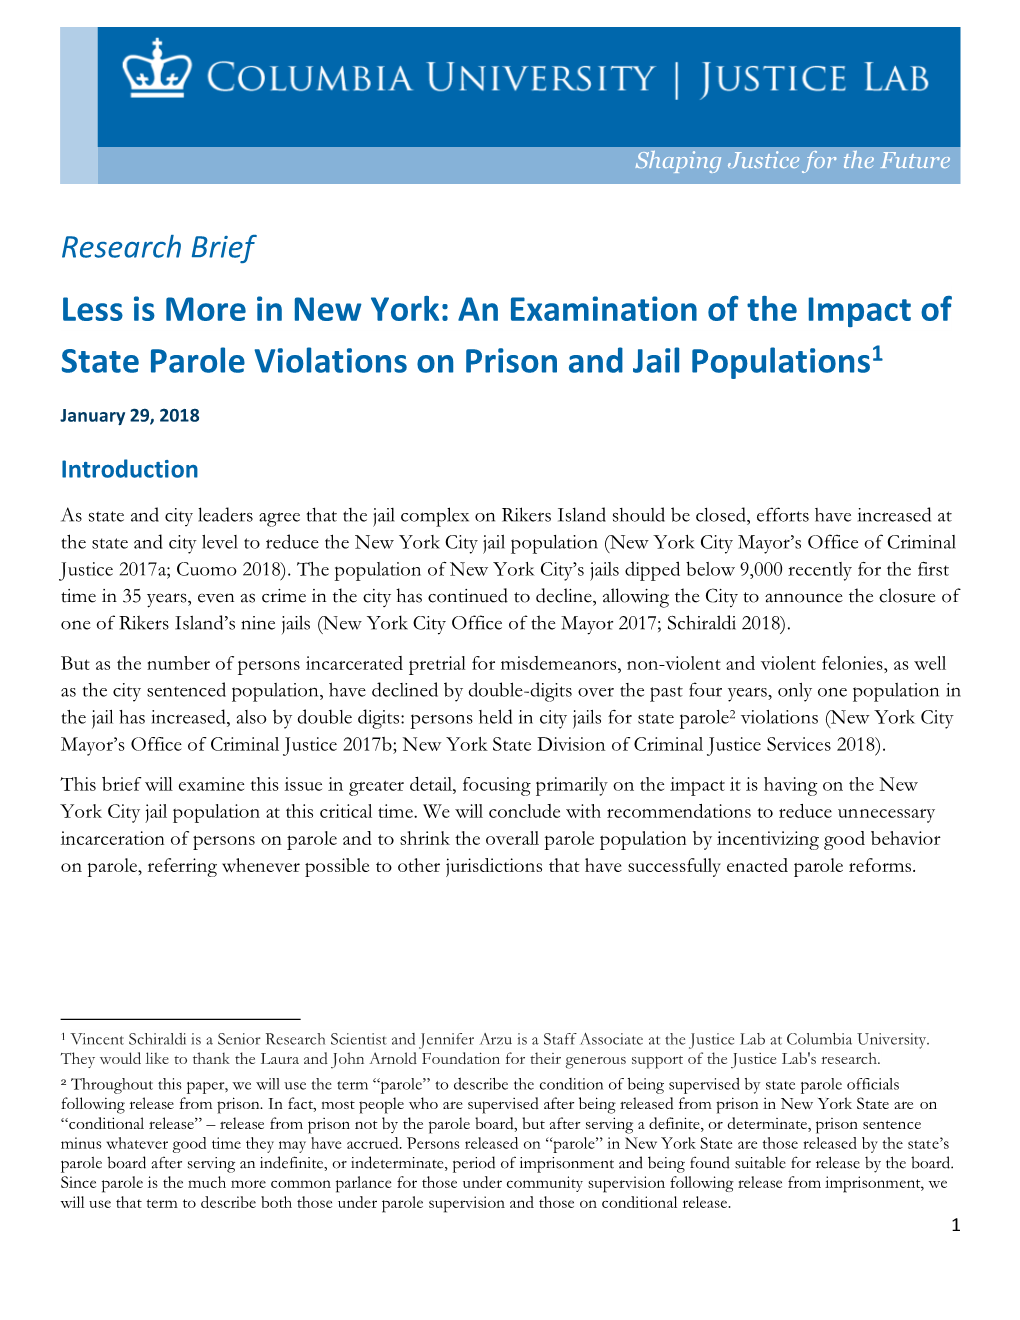 Less Is More in New York: an Examination of the Impact of State Parole Violations on Prison and Jail Populations1